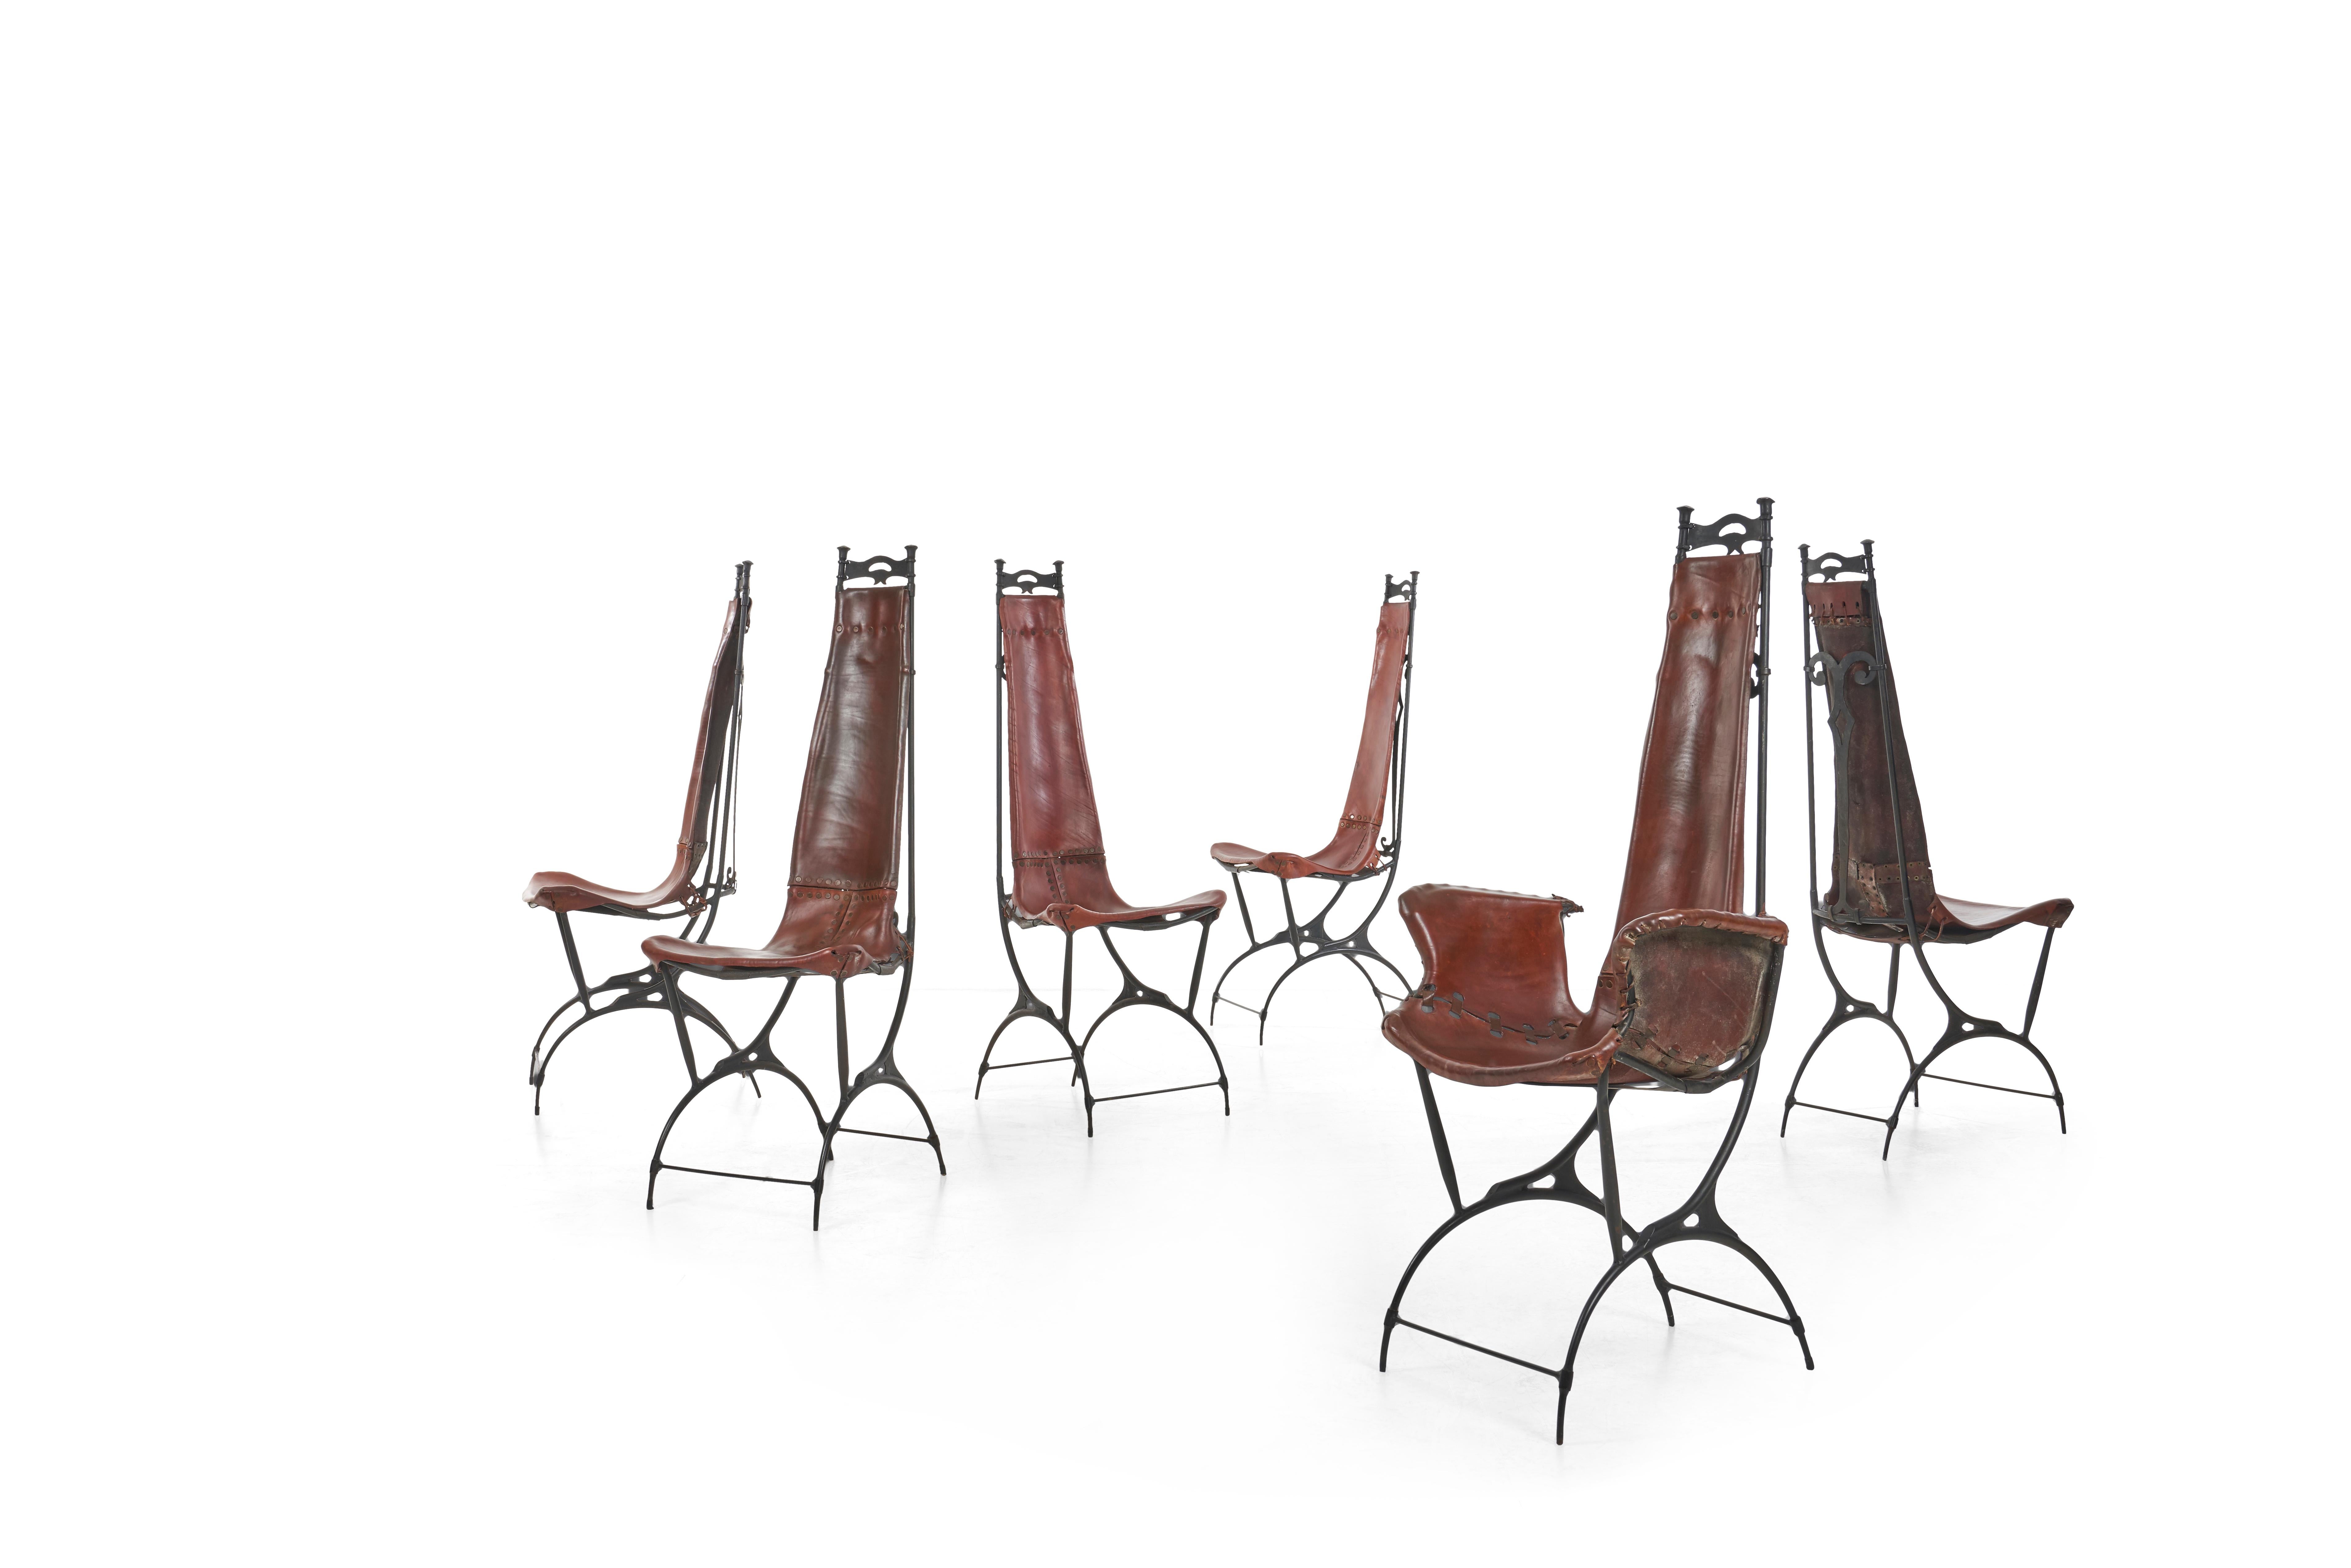 Sido and François Thevenin dining chairs, 6 side chairs and 2 armchairs,
Hand forged steel cut and welded, cut and seemed leather with brass rivets. Each chair unique and each has hand marked signature on leather.
Measures: Armchair height (2)